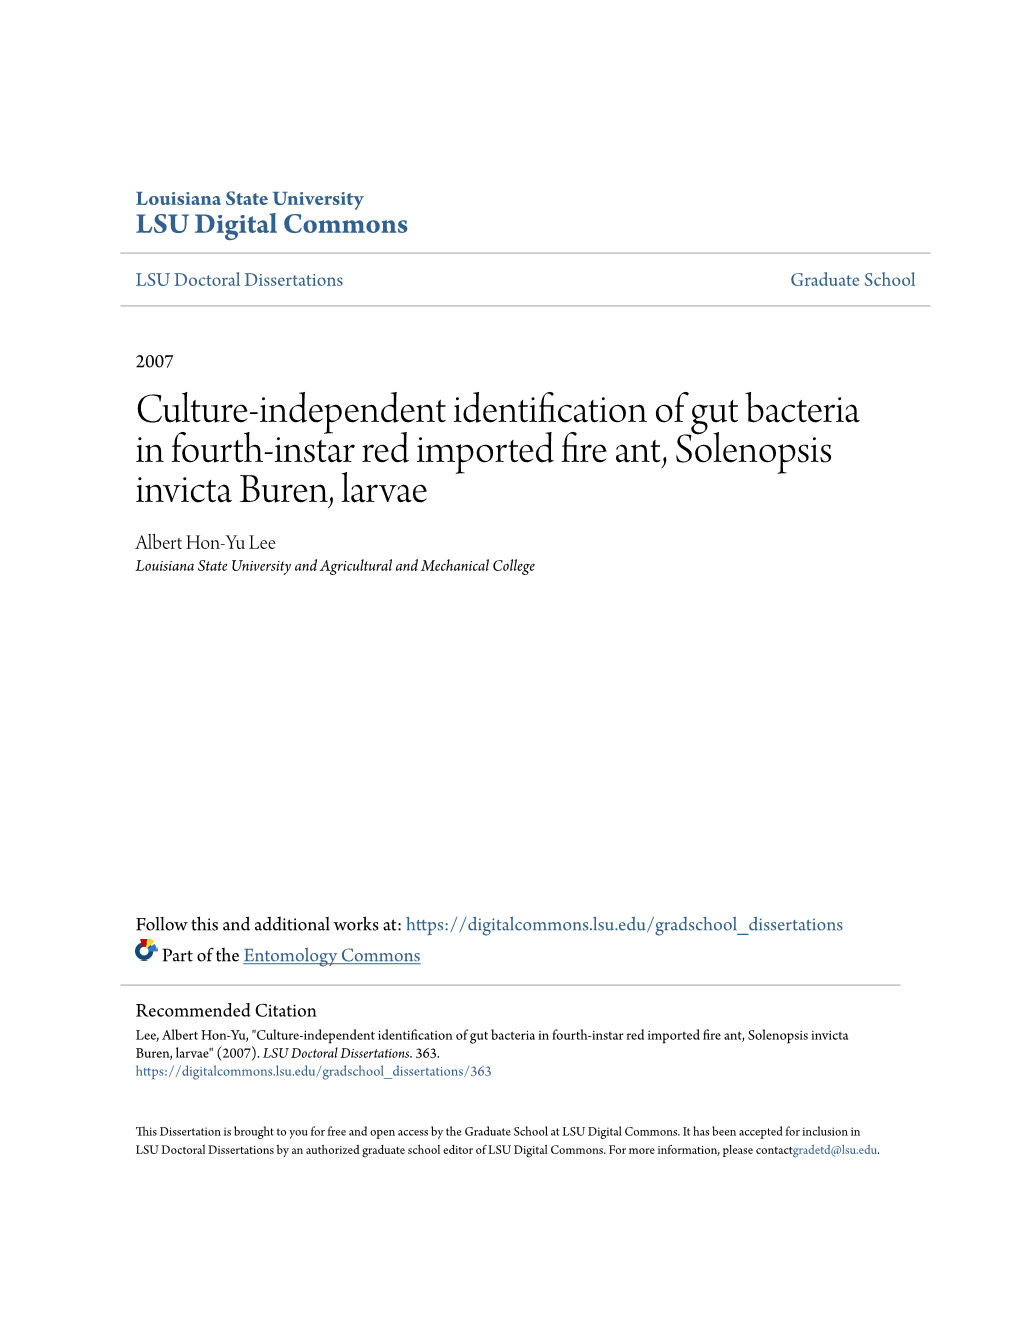 Culture-Independent Identification of Gut Bacteria in Fourth-Instar Red